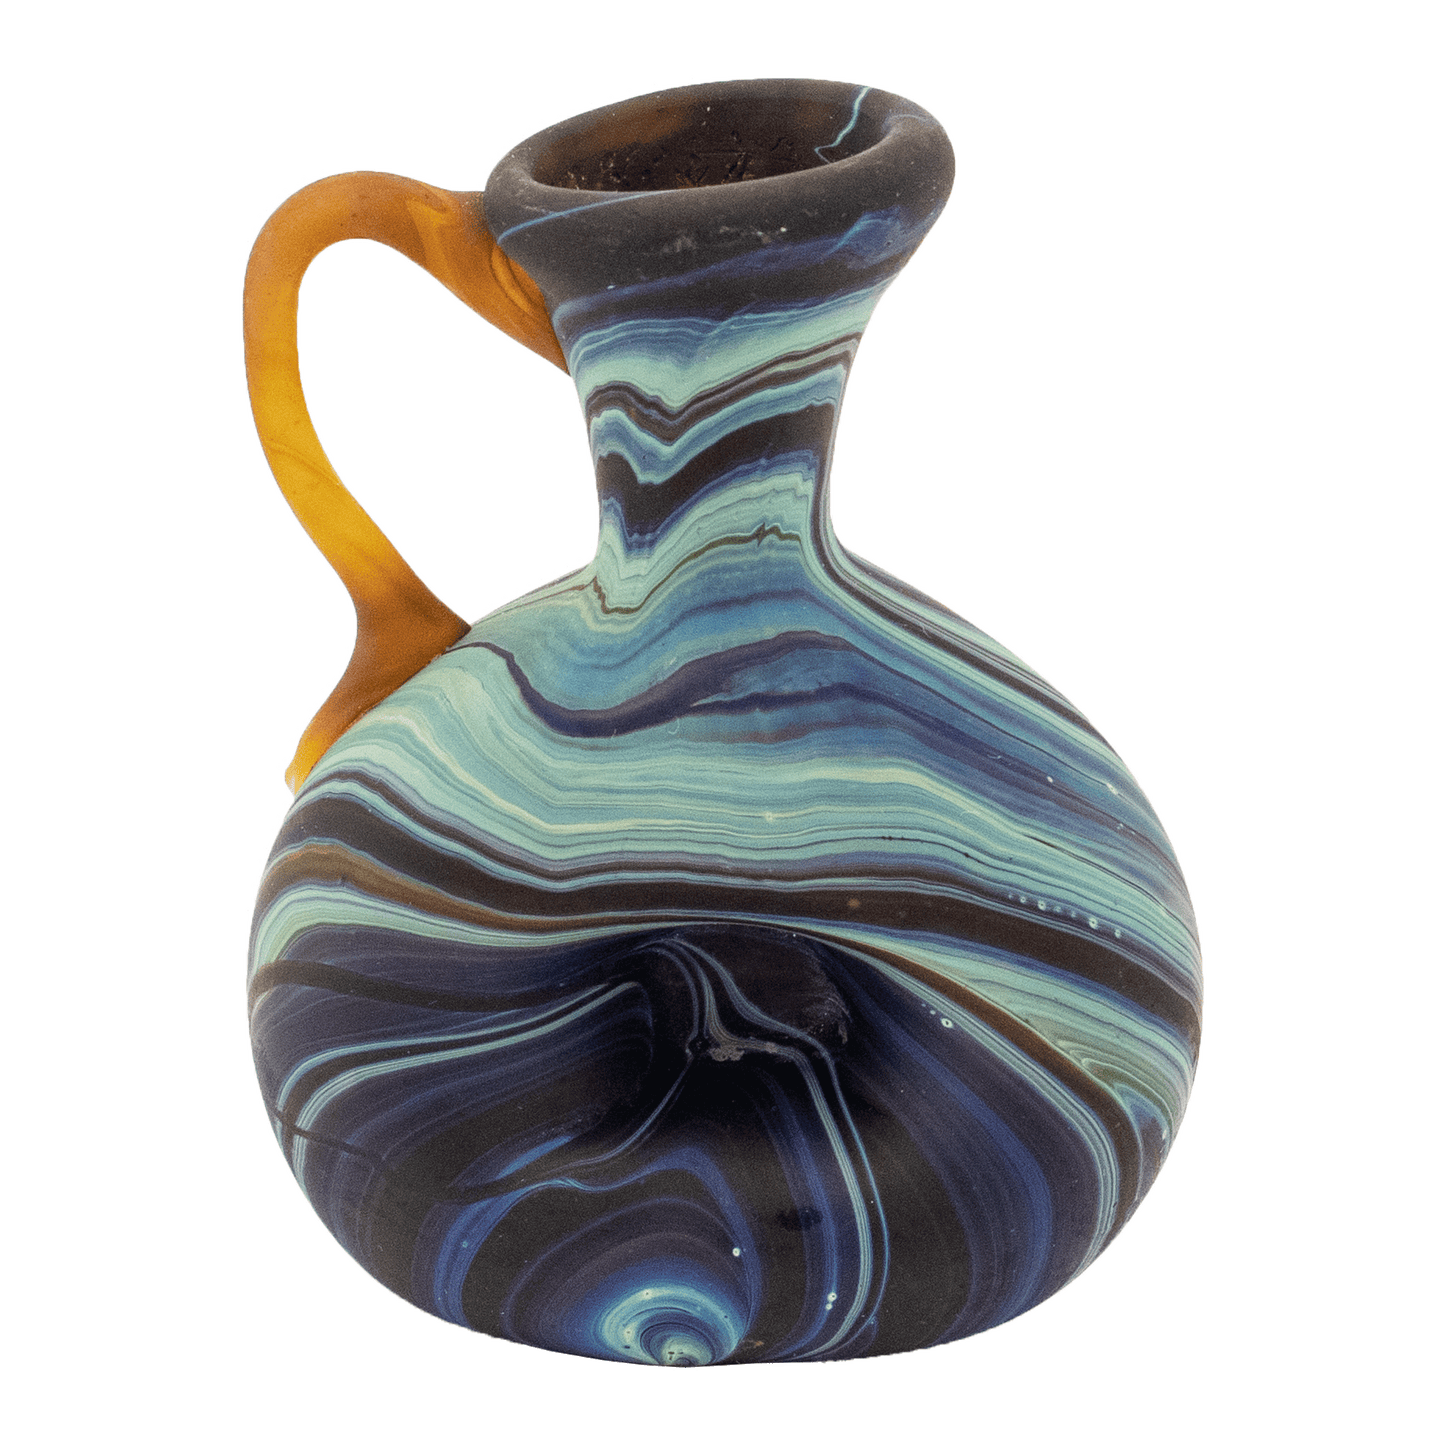 Phoenician glass bud vase with swirls of brown and blue and an amber handle